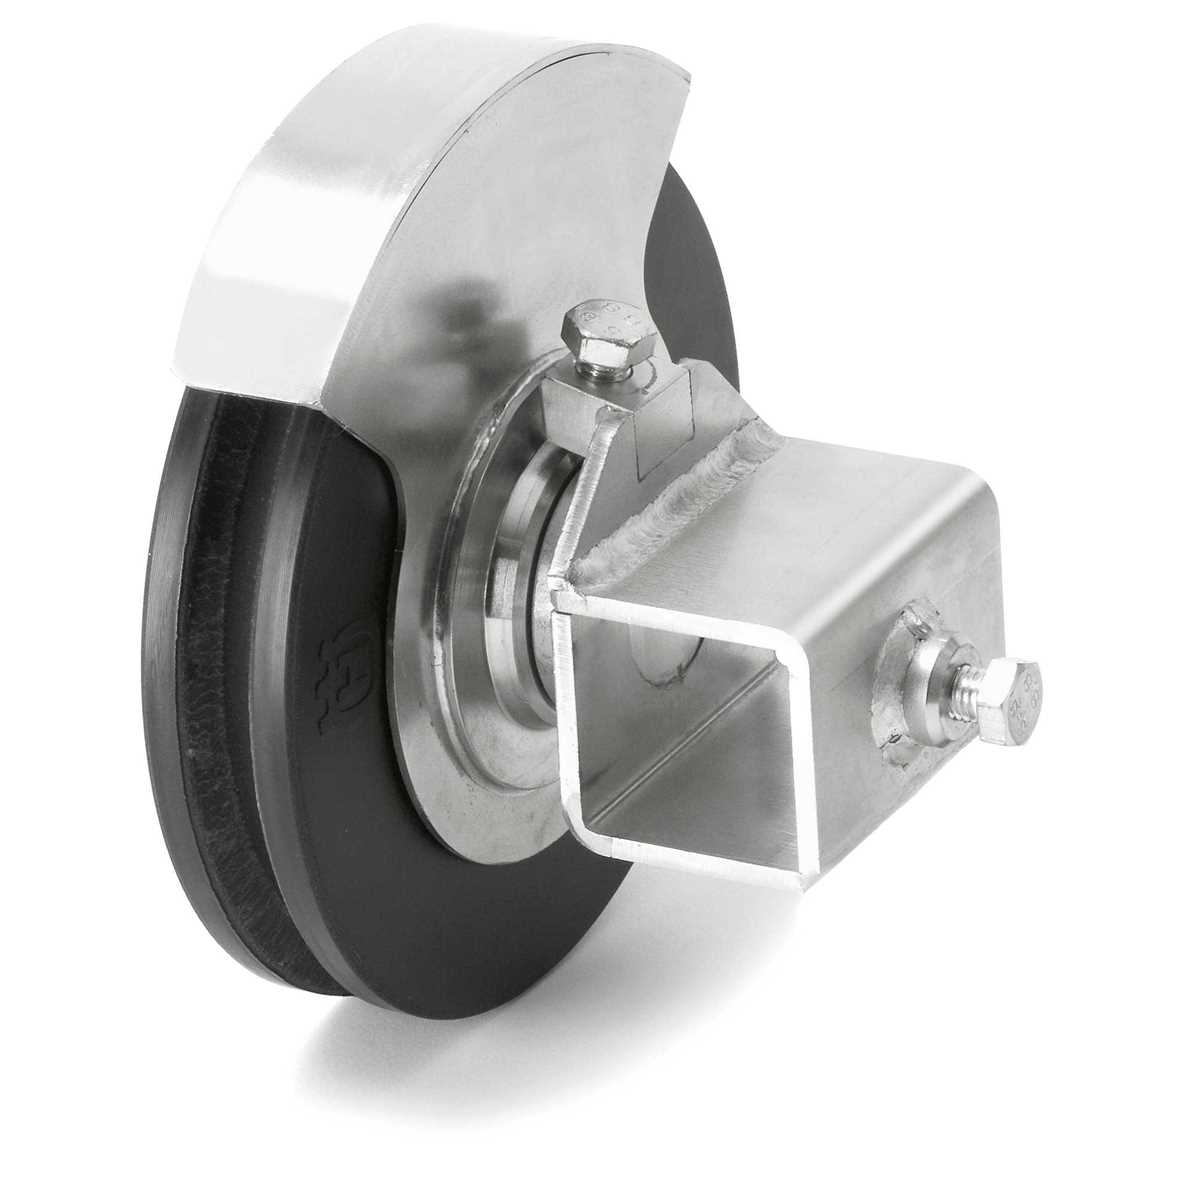 Offset pulley